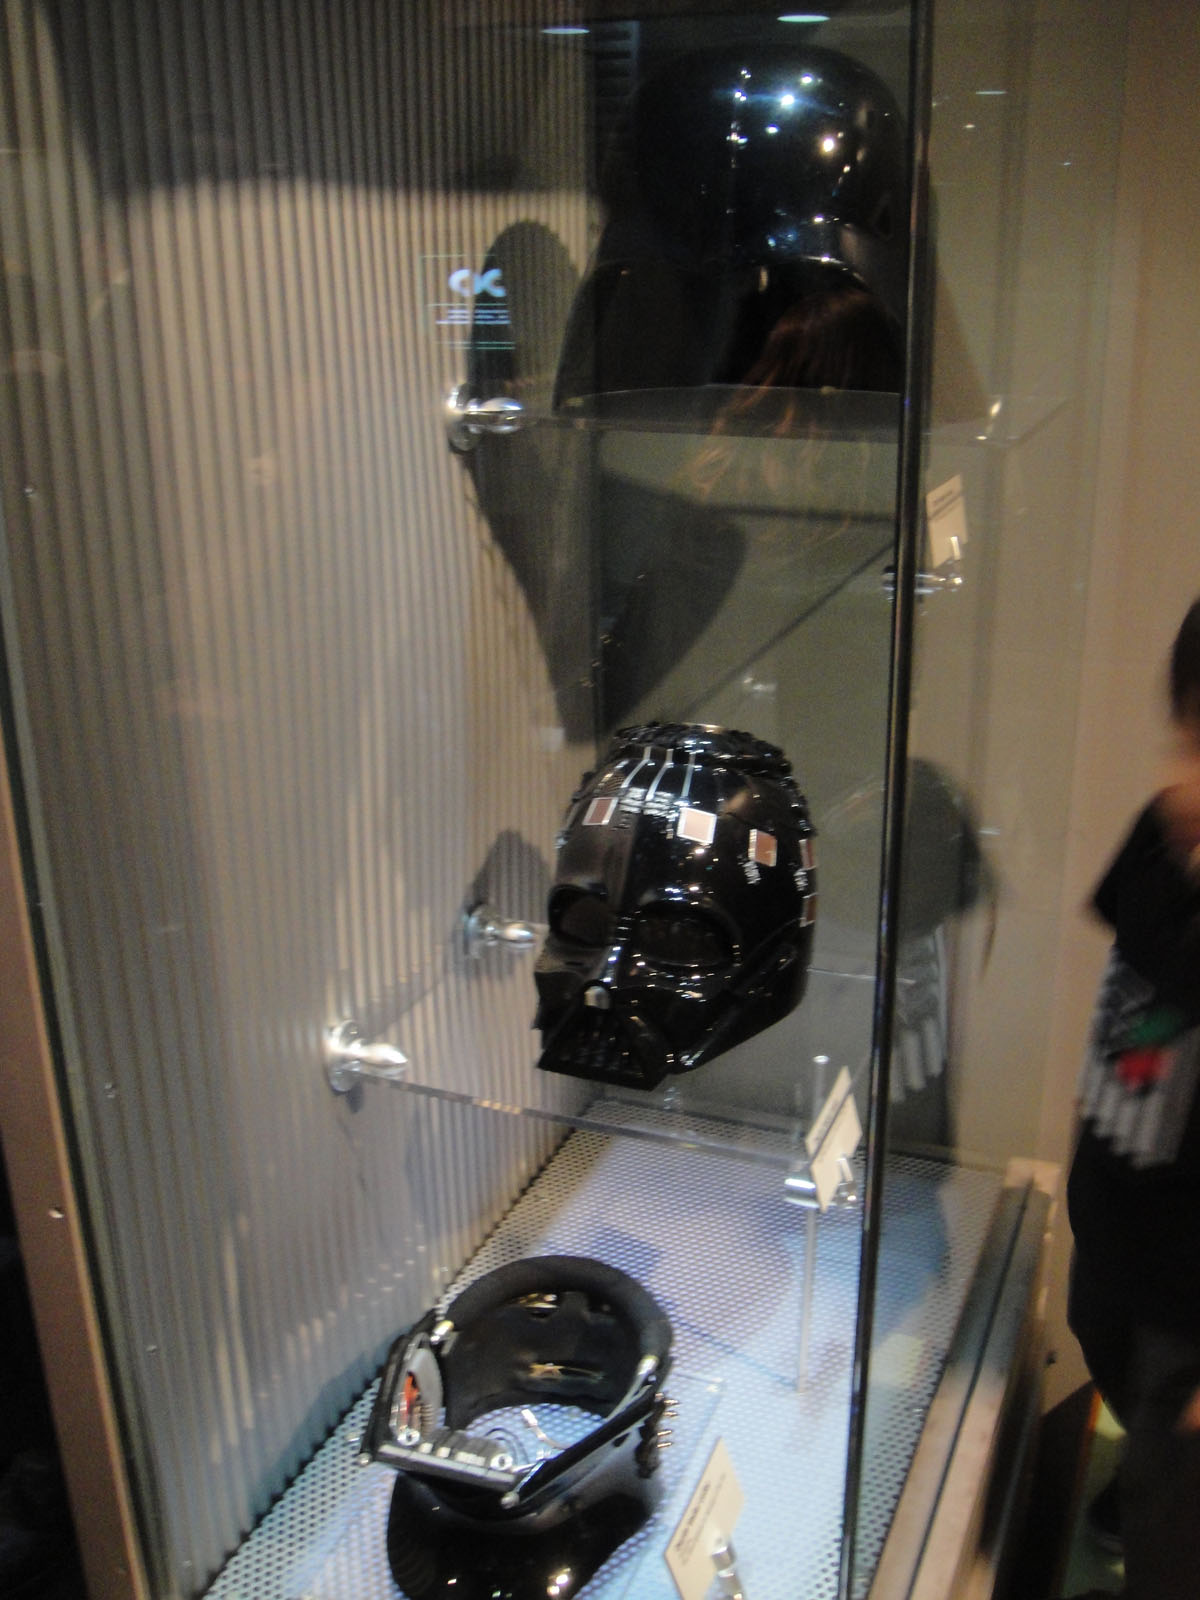 a glass case displays a motorcycle helmet in the background